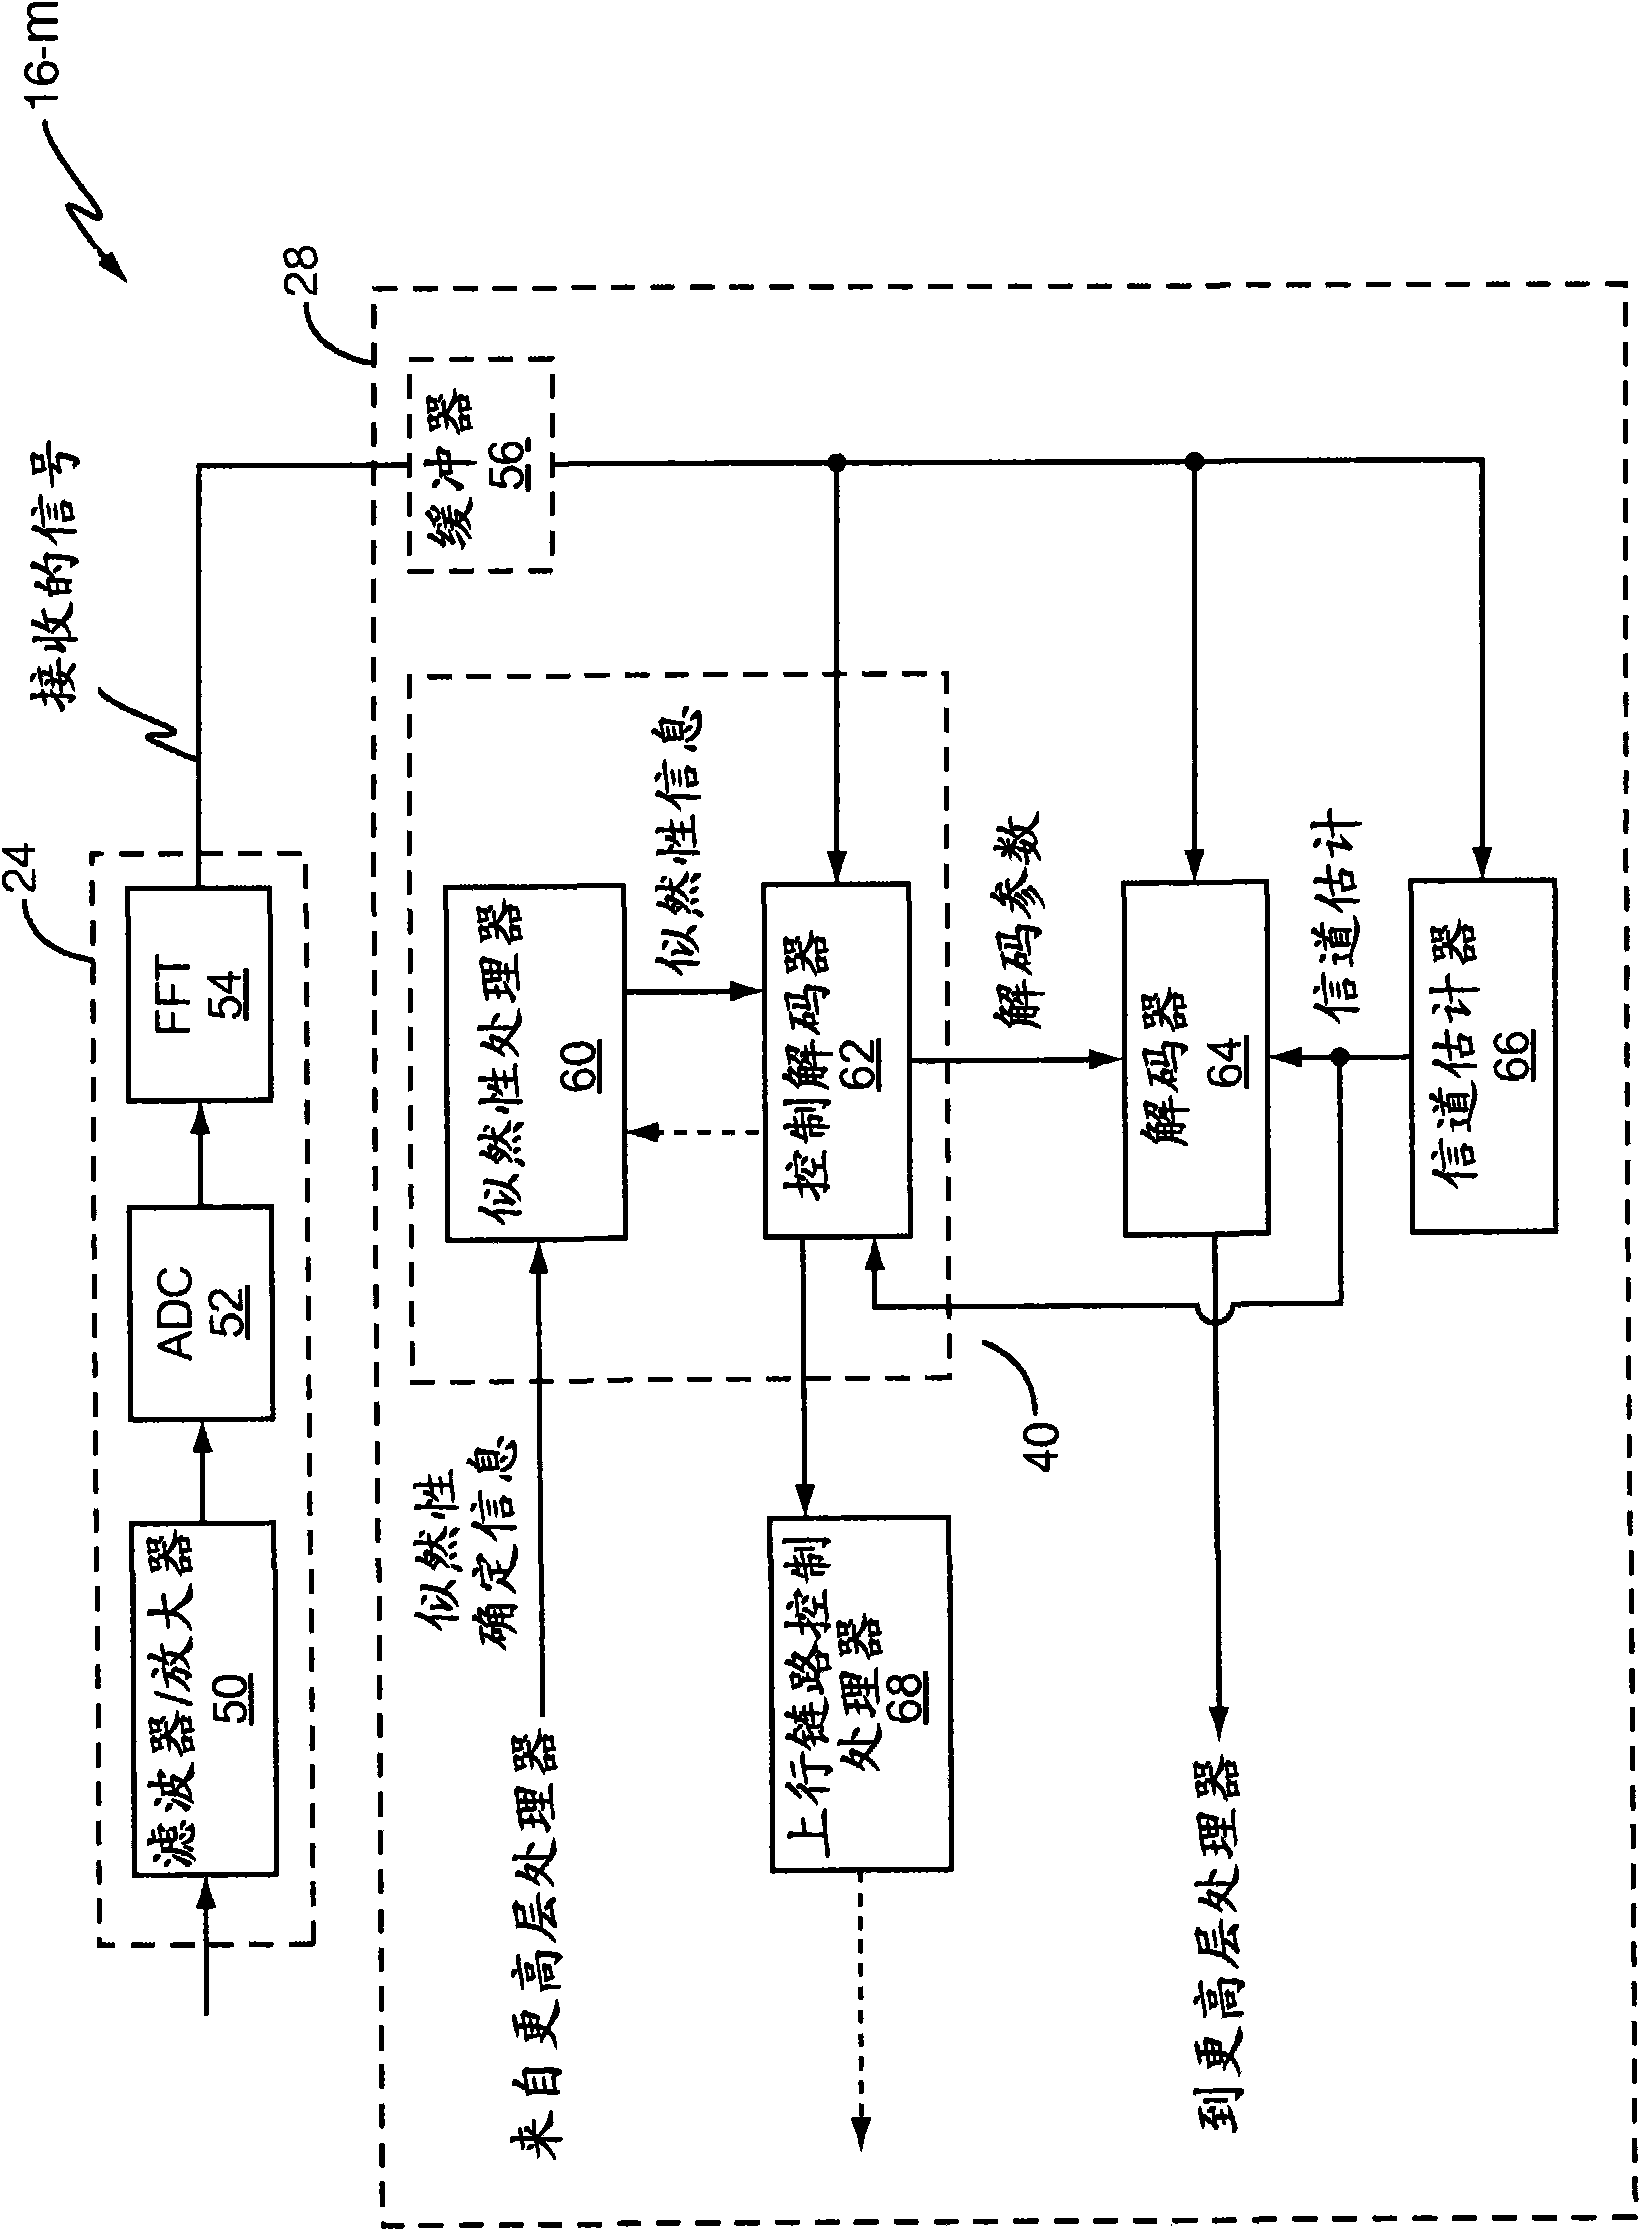 Method and apparatus for blind decoding